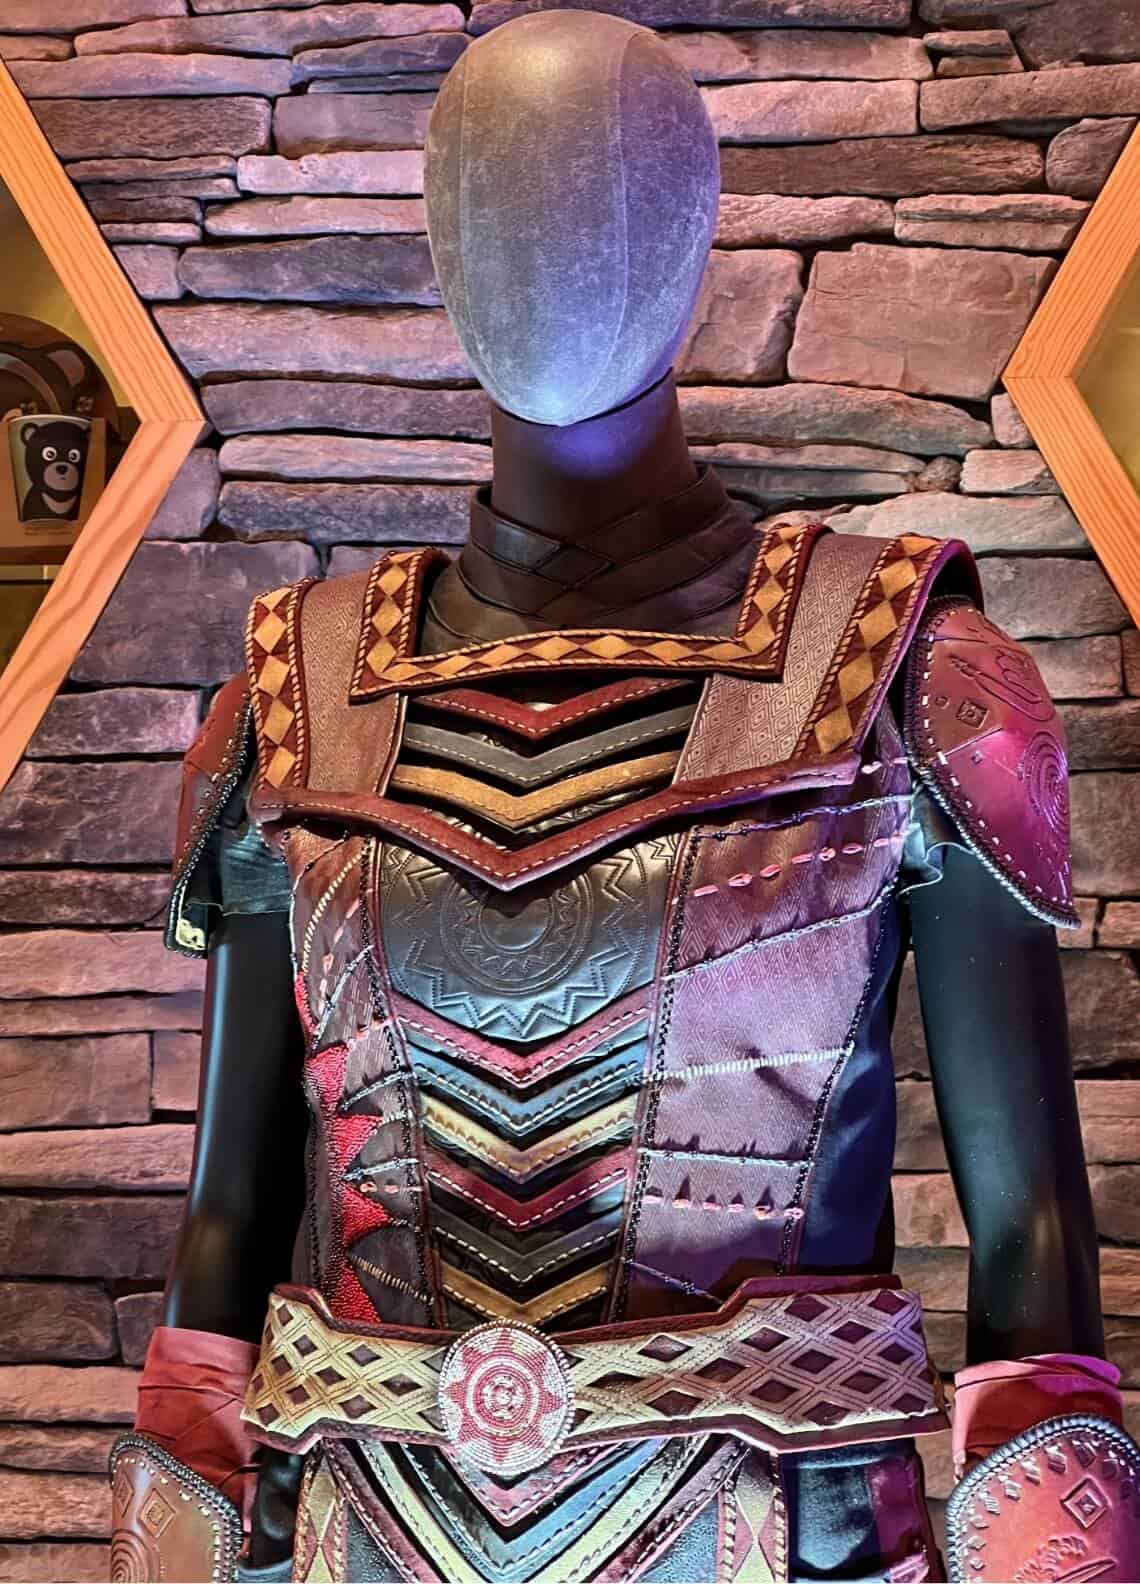 Echo's armor features a Sun Symbol on the chest plate.